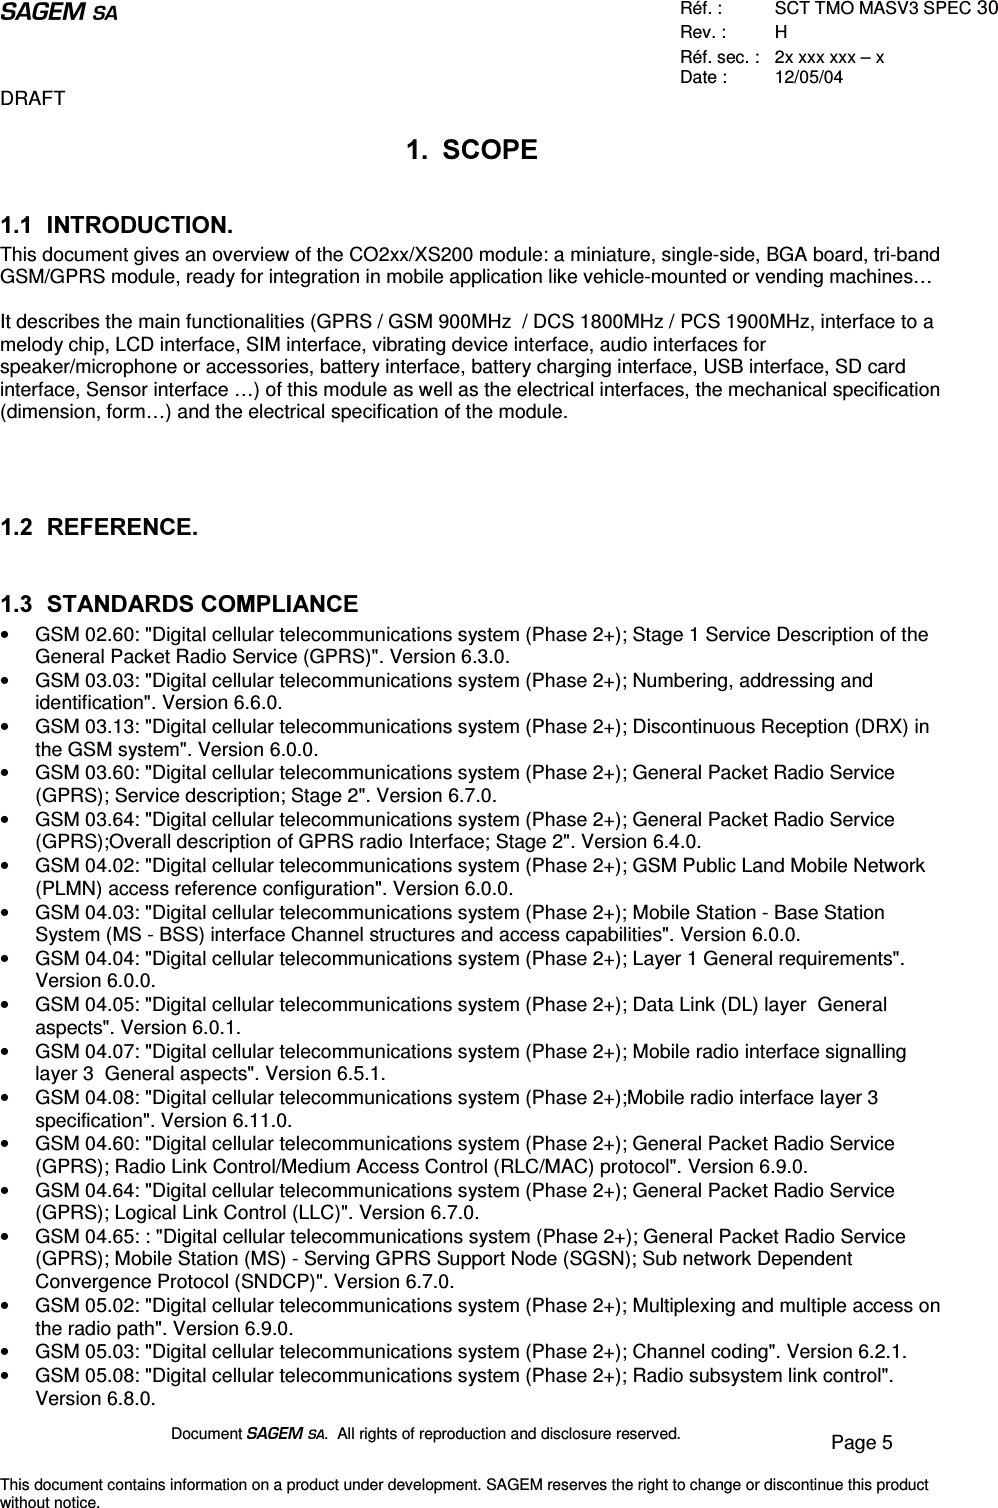  Réf. :  SCT TMO MASV3 SPEC 30 Rev. :  H Réf. sec. :  2x xxx xxx – x Date :  12/05/04 DRAFT Document  .  All rights of reproduction and disclosure reserved.  Page 5 This document contains information on a product under development. SAGEM reserves the right to change or discontinue this product without notice.  6&amp;23( ,1752&apos;8&amp;7,21This document gives an overview of the CO2xx/XS200 module: a miniature, single-side, BGA board, tri-band GSM/GPRS module, ready for integration in mobile application like vehicle-mounted or vending machines…  It describes the main functionalities (GPRS / GSM 900MHz  / DCS 1800MHz / PCS 1900MHz, interface to a melody chip, LCD interface, SIM interface, vibrating device interface, audio interfaces for speaker/microphone or accessories, battery interface, battery charging interface, USB interface, SD card interface, Sensor interface …) of this module as well as the electrical interfaces, the mechanical specification (dimension, form… ) and the electrical specification of the module.     5()(5(1&amp;(  67$1&apos;$5&apos;6&amp;203/,$1&amp;(•  GSM 02.60: &quot;Digital cellular telecommunications system (Phase 2+); Stage 1 Service Description of the General Packet Radio Service (GPRS)&quot;. Version 6.3.0. •  GSM 03.03: &quot;Digital cellular telecommunications system (Phase 2+); Numbering, addressing and identification&quot;. Version 6.6.0. •  GSM 03.13: &quot;Digital cellular telecommunications system (Phase 2+); Discontinuous Reception (DRX) in the GSM system&quot;. Version 6.0.0. •  GSM 03.60: &quot;Digital cellular telecommunications system (Phase 2+); General Packet Radio Service (GPRS); Service description; Stage 2&quot;. Version 6.7.0. •  GSM 03.64: &quot;Digital cellular telecommunications system (Phase 2+); General Packet Radio Service (GPRS);Overall description of GPRS radio Interface; Stage 2&quot;. Version 6.4.0. •  GSM 04.02: &quot;Digital cellular telecommunications system (Phase 2+); GSM Public Land Mobile Network (PLMN) access reference configuration&quot;. Version 6.0.0. •  GSM 04.03: &quot;Digital cellular telecommunications system (Phase 2+); Mobile Station - Base Station System (MS - BSS) interface Channel structures and access capabilities&quot;. Version 6.0.0. •  GSM 04.04: &quot;Digital cellular telecommunications system (Phase 2+); Layer 1 General requirements&quot;. Version 6.0.0. •  GSM 04.05: &quot;Digital cellular telecommunications system (Phase 2+); Data Link (DL) layer  General aspects&quot;. Version 6.0.1. •  GSM 04.07: &quot;Digital cellular telecommunications system (Phase 2+); Mobile radio interface signalling layer 3  General aspects&quot;. Version 6.5.1. •  GSM 04.08: &quot;Digital cellular telecommunications system (Phase 2+);Mobile radio interface layer 3 specification&quot;. Version 6.11.0. •  GSM 04.60: &quot;Digital cellular telecommunications system (Phase 2+); General Packet Radio Service (GPRS); Radio Link Control/Medium Access Control (RLC/MAC) protocol&quot;. Version 6.9.0. •  GSM 04.64: &quot;Digital cellular telecommunications system (Phase 2+); General Packet Radio Service (GPRS); Logical Link Control (LLC)&quot;. Version 6.7.0. •  GSM 04.65: : &quot;Digital cellular telecommunications system (Phase 2+); General Packet Radio Service (GPRS); Mobile Station (MS) - Serving GPRS Support Node (SGSN); Sub network Dependent Convergence Protocol (SNDCP)&quot;. Version 6.7.0. •  GSM 05.02: &quot;Digital cellular telecommunications system (Phase 2+); Multiplexing and multiple access on the radio path&quot;. Version 6.9.0. •  GSM 05.03: &quot;Digital cellular telecommunications system (Phase 2+); Channel coding&quot;. Version 6.2.1. •  GSM 05.08: &quot;Digital cellular telecommunications system (Phase 2+); Radio subsystem link control&quot;. Version 6.8.0. 